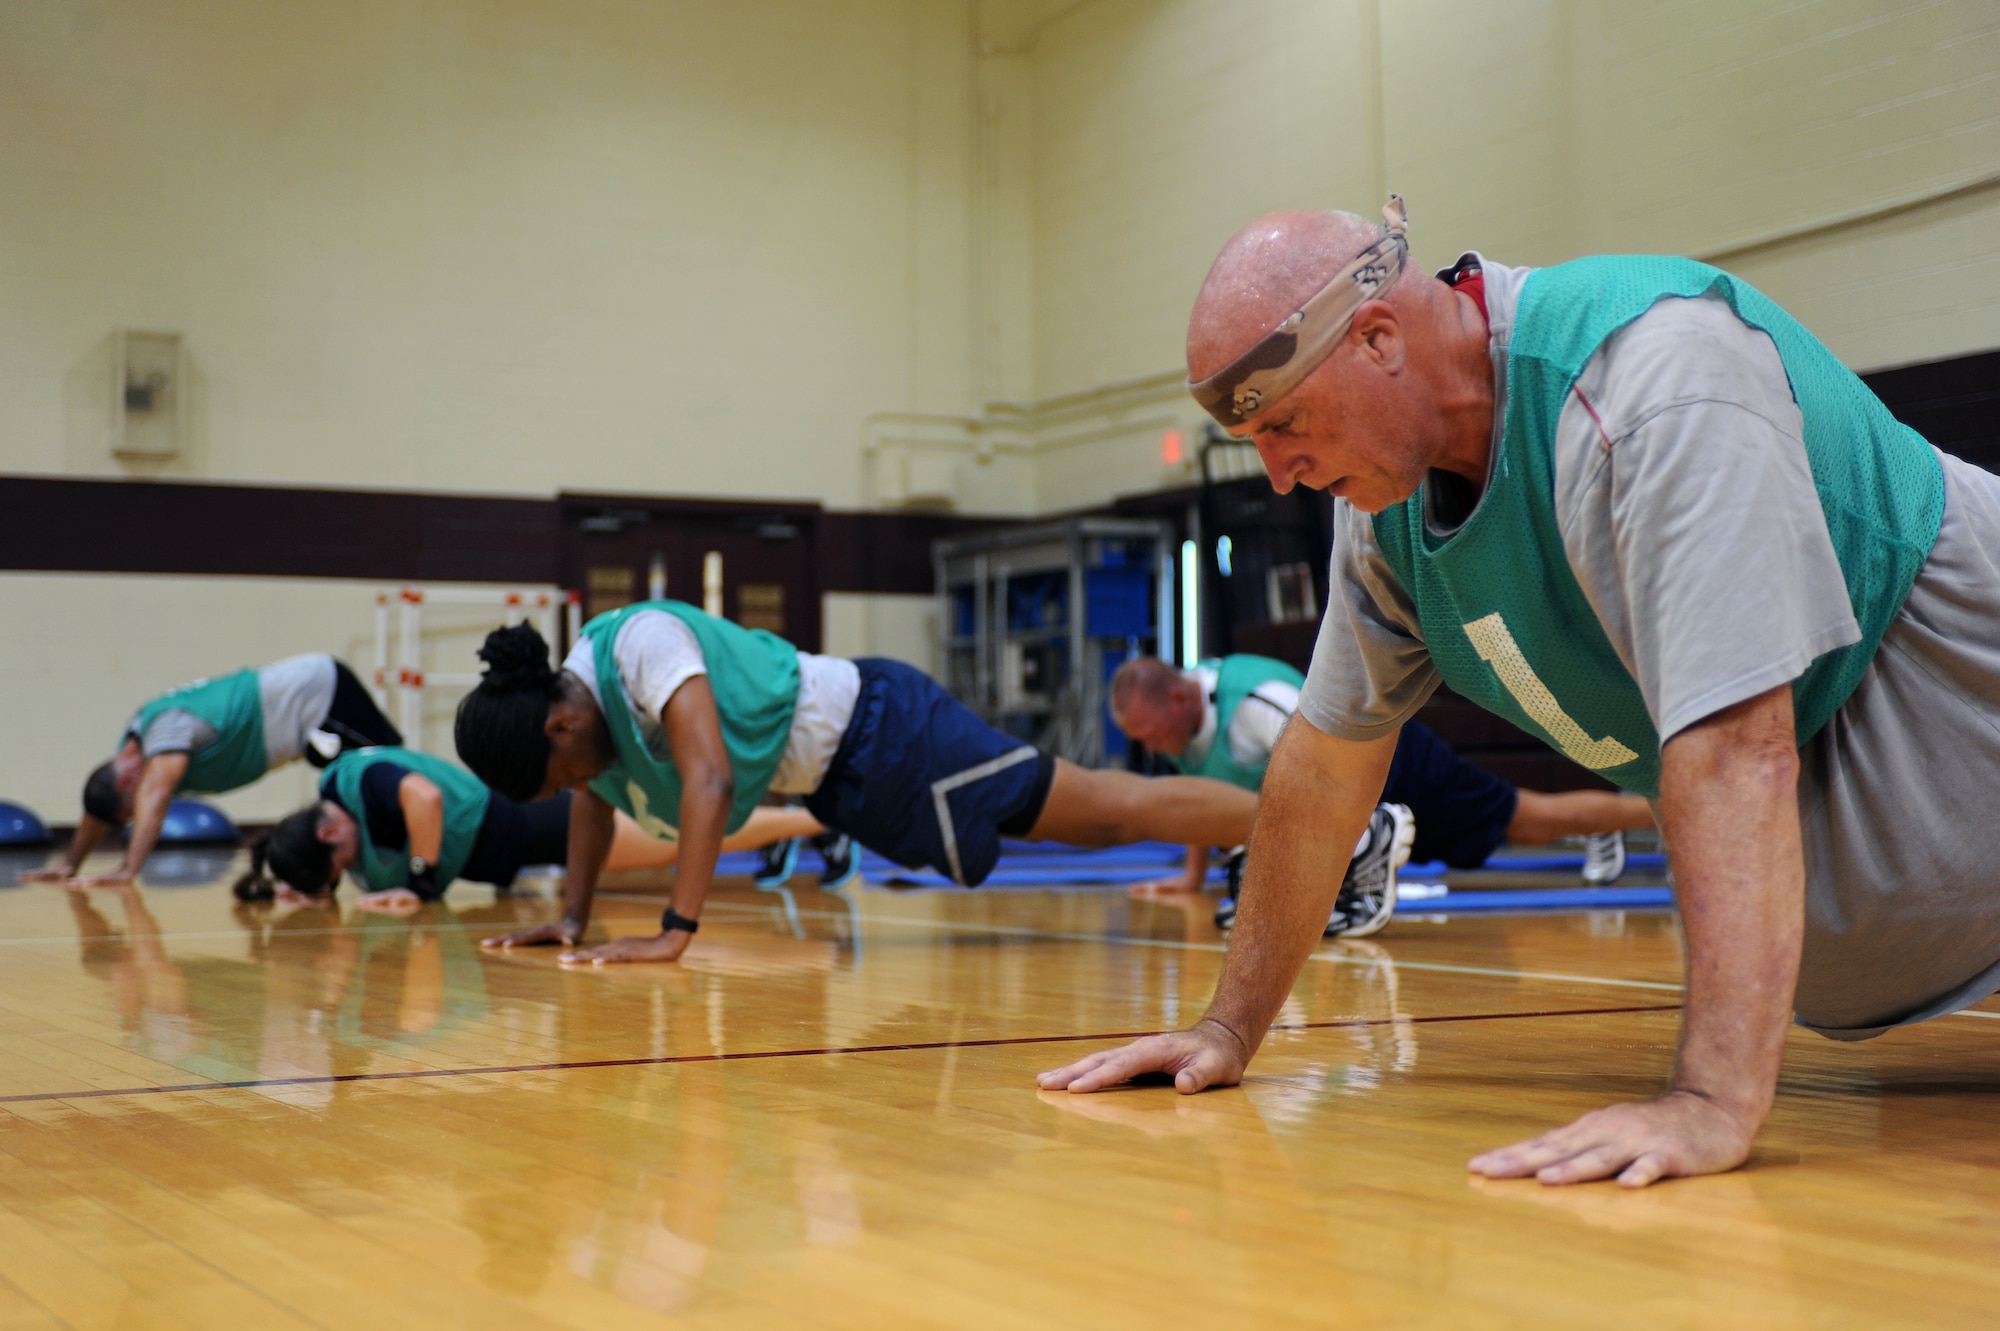 U.S. Air Force Chief Master Sgt. Timothy Erdmann performs push-ups during a boot camp challenge on Seymour Johnson Air Force Base, N.C., June 9, 2012. The circuit training challenge involved upper and lower body, including abdominal exercises, each lasting one minute. Erdmann, 916th Maintenance Squadron superintendent, is from Menasha, Wis. (U.S. Air Force photo/Airman 1st Class John Nieves Camacho/Released)